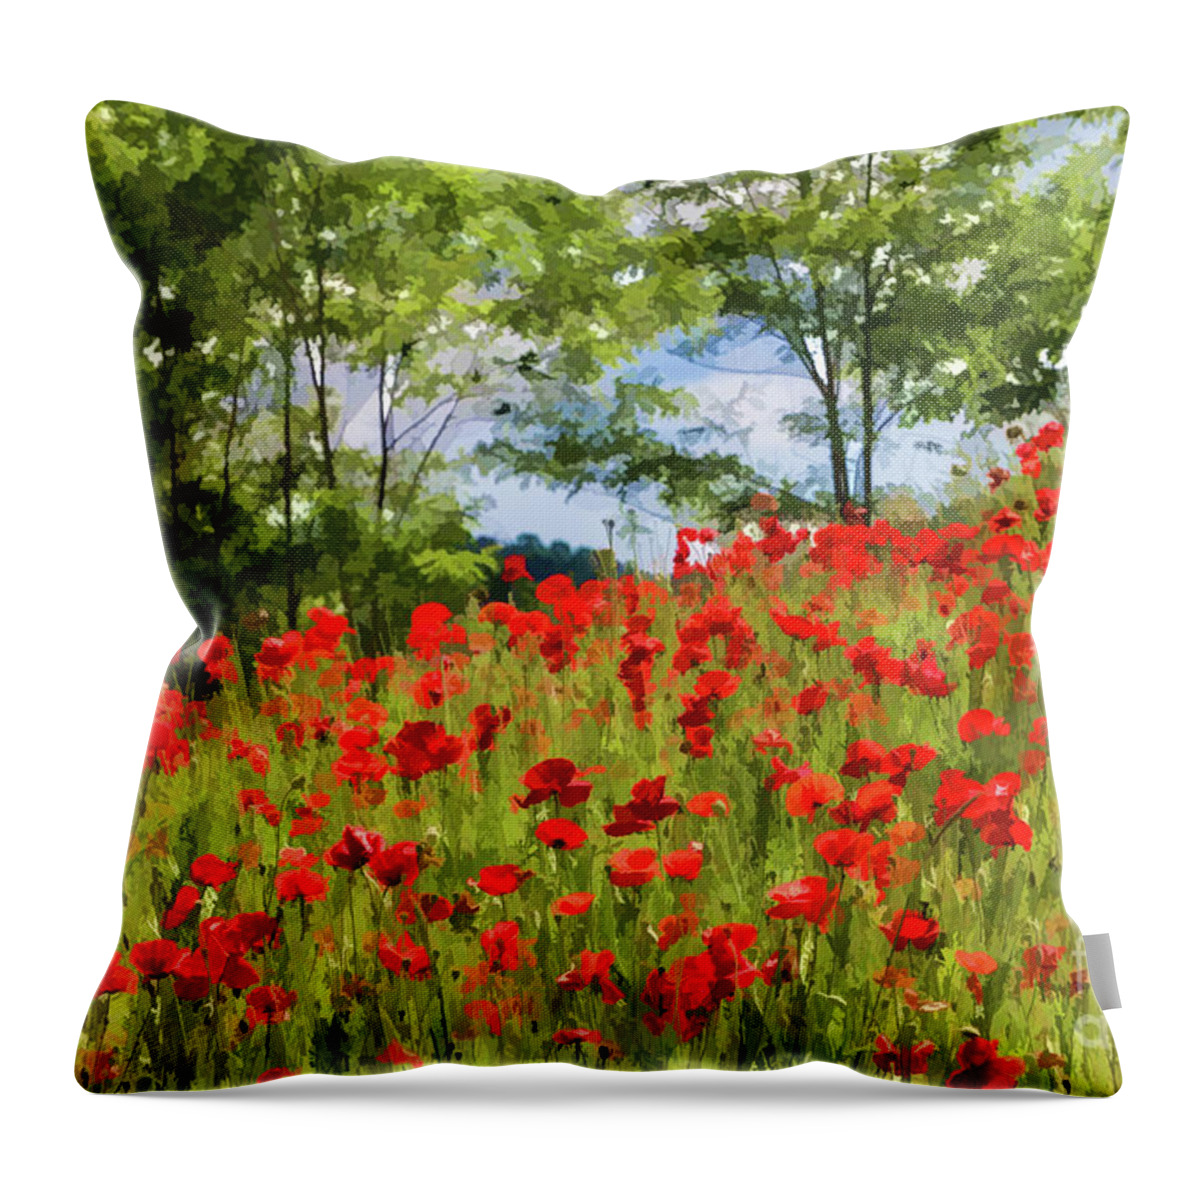 Flowers Throw Pillow featuring the digital art Poppies and Trees by Lisa Lemmons-Powers